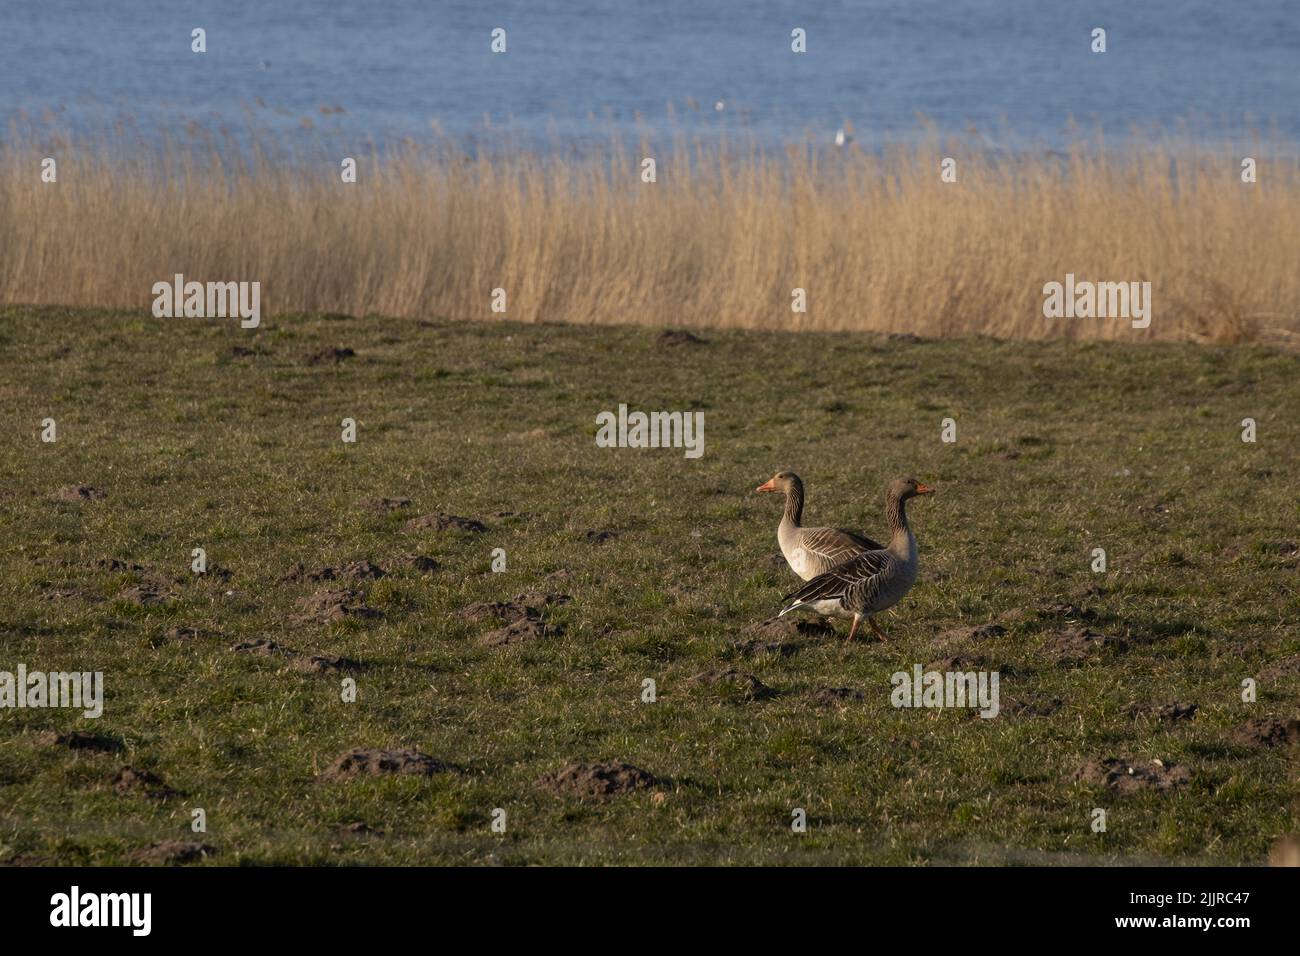 The two greylag geese are standing on green meadow against the background of blue lake Stock Photo